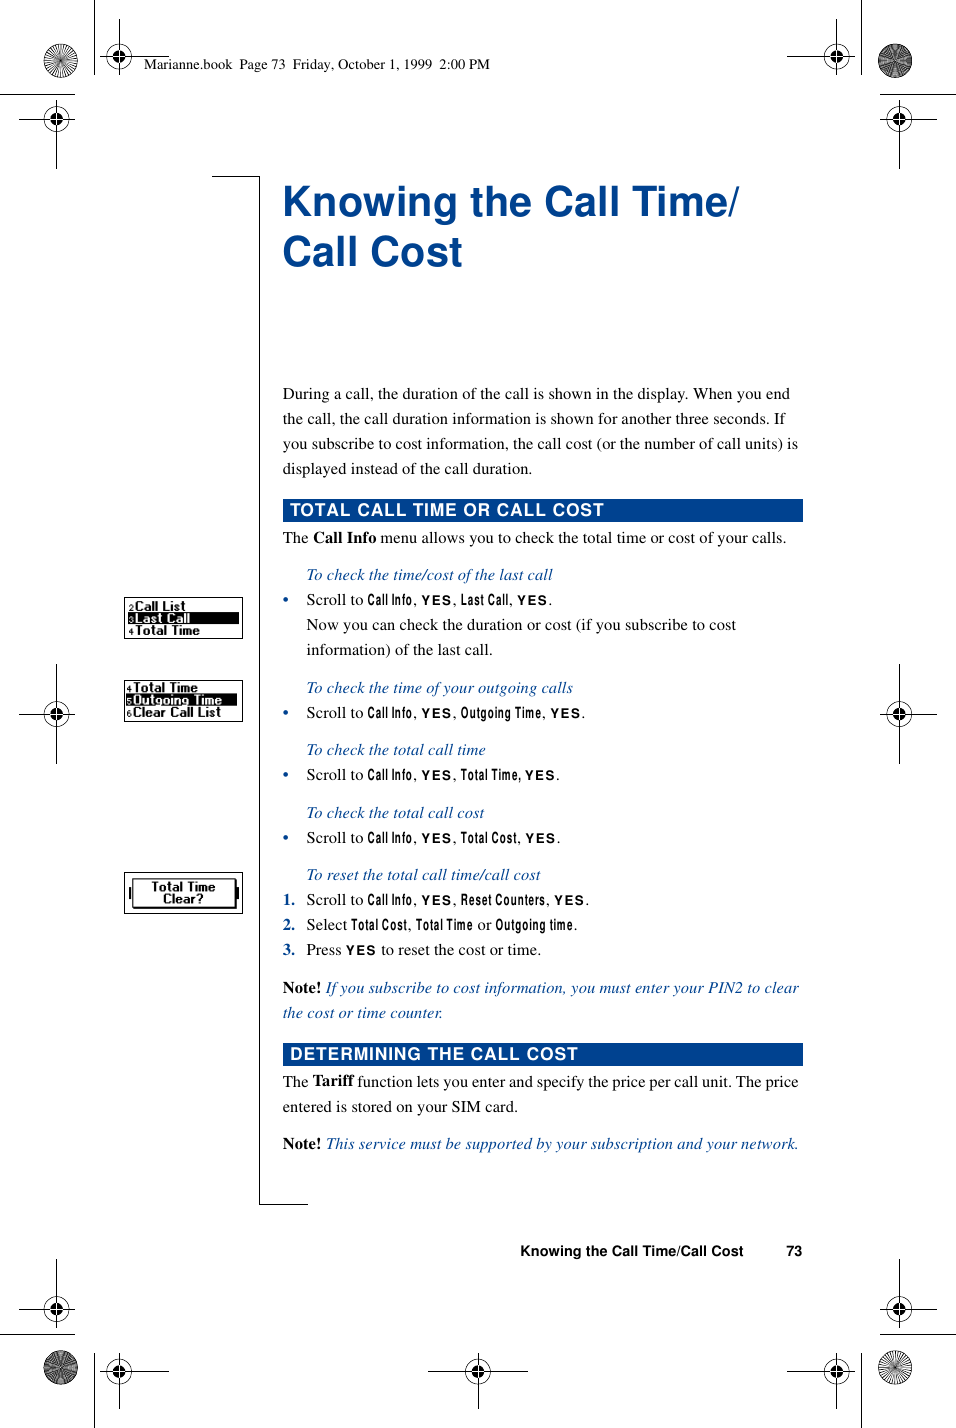 Knowing the Call Time/Call Cost 73Knowing the Call Time/Call CostDuring a call, the duration of the call is shown in the display. When you end the call, the call duration information is shown for another three seconds. If you subscribe to cost information, the call cost (or the number of call units) is displayed instead of the call duration. The Call Info menu allows you to check the total time or cost of your calls.To check the time/cost of the last call•Scroll to Call Info, YES, Last Call, YES.Now you can check the duration or cost (if you subscribe to cost information) of the last call.To check the time of your outgoing calls•Scroll to Call Info, YES, Outgoing Time, YES.To check the total call time•Scroll to Call Info, YES, Total Time, YES.To check the total call cost•Scroll to Call Info, YES, Total Cost, YES. To reset the total call time/call cost1. Scroll to Call Info, YES, Reset Counters, YES.2. Select Total Cost, Total Time or Outgoing time.3. Press YES to reset the cost or time.Note! If you subscribe to cost information, you must enter your PIN2 to clear the cost or time counter.The Tariff function lets you enter and specify the price per call unit. The price entered is stored on your SIM card.Note! This service must be supported by your subscription and your network.TOTAL CALL TIME OR CALL COSTDETERMINING THE CALL COSTMarianne.book  Page 73  Friday, October 1, 1999  2:00 PM